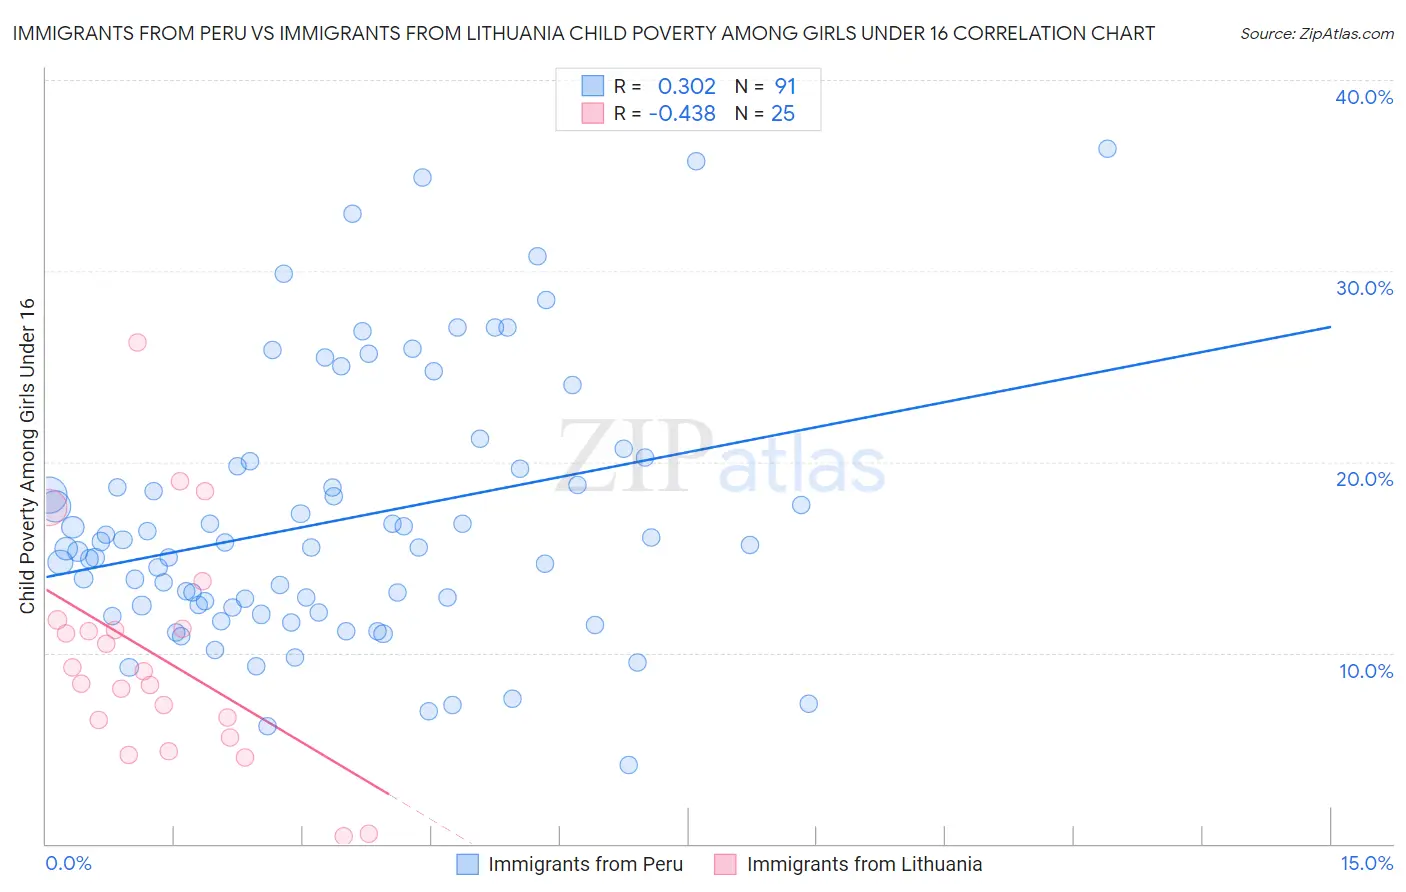 Immigrants from Peru vs Immigrants from Lithuania Child Poverty Among Girls Under 16